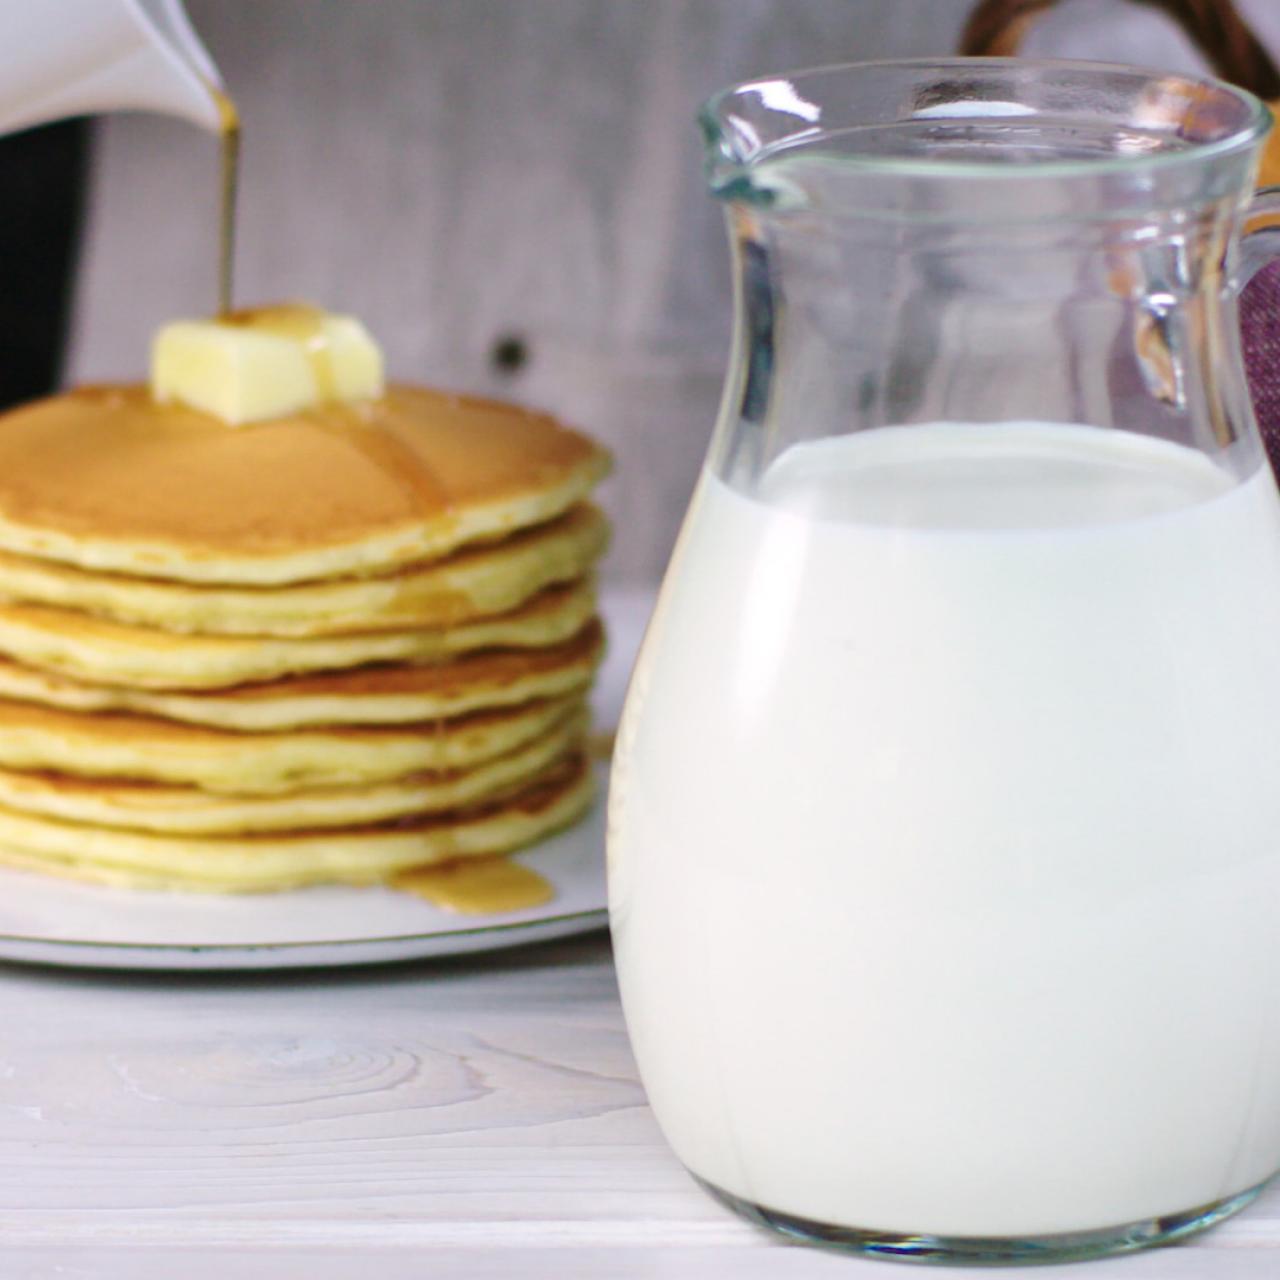 You'll need: 1.5 cups of buttermilk 1 cup of water